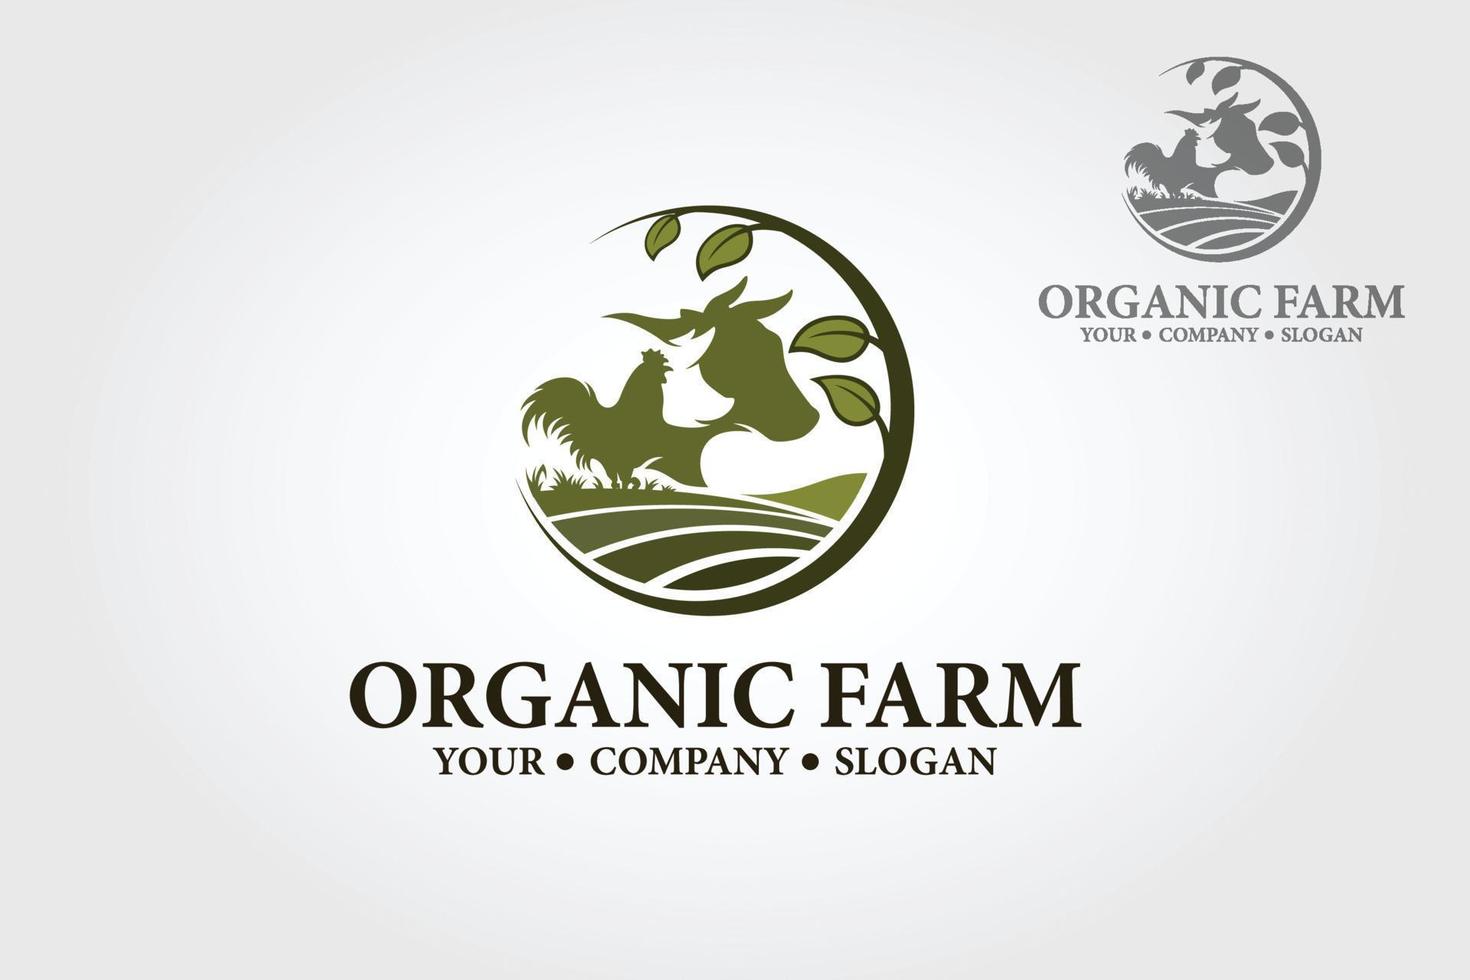 Organic Farm Vector Logo Template. Excellent Chicken and Poultry Farm logo template. Logo could be used as the main identity element of organic farm or store, vegetarian or vegan restaurant.